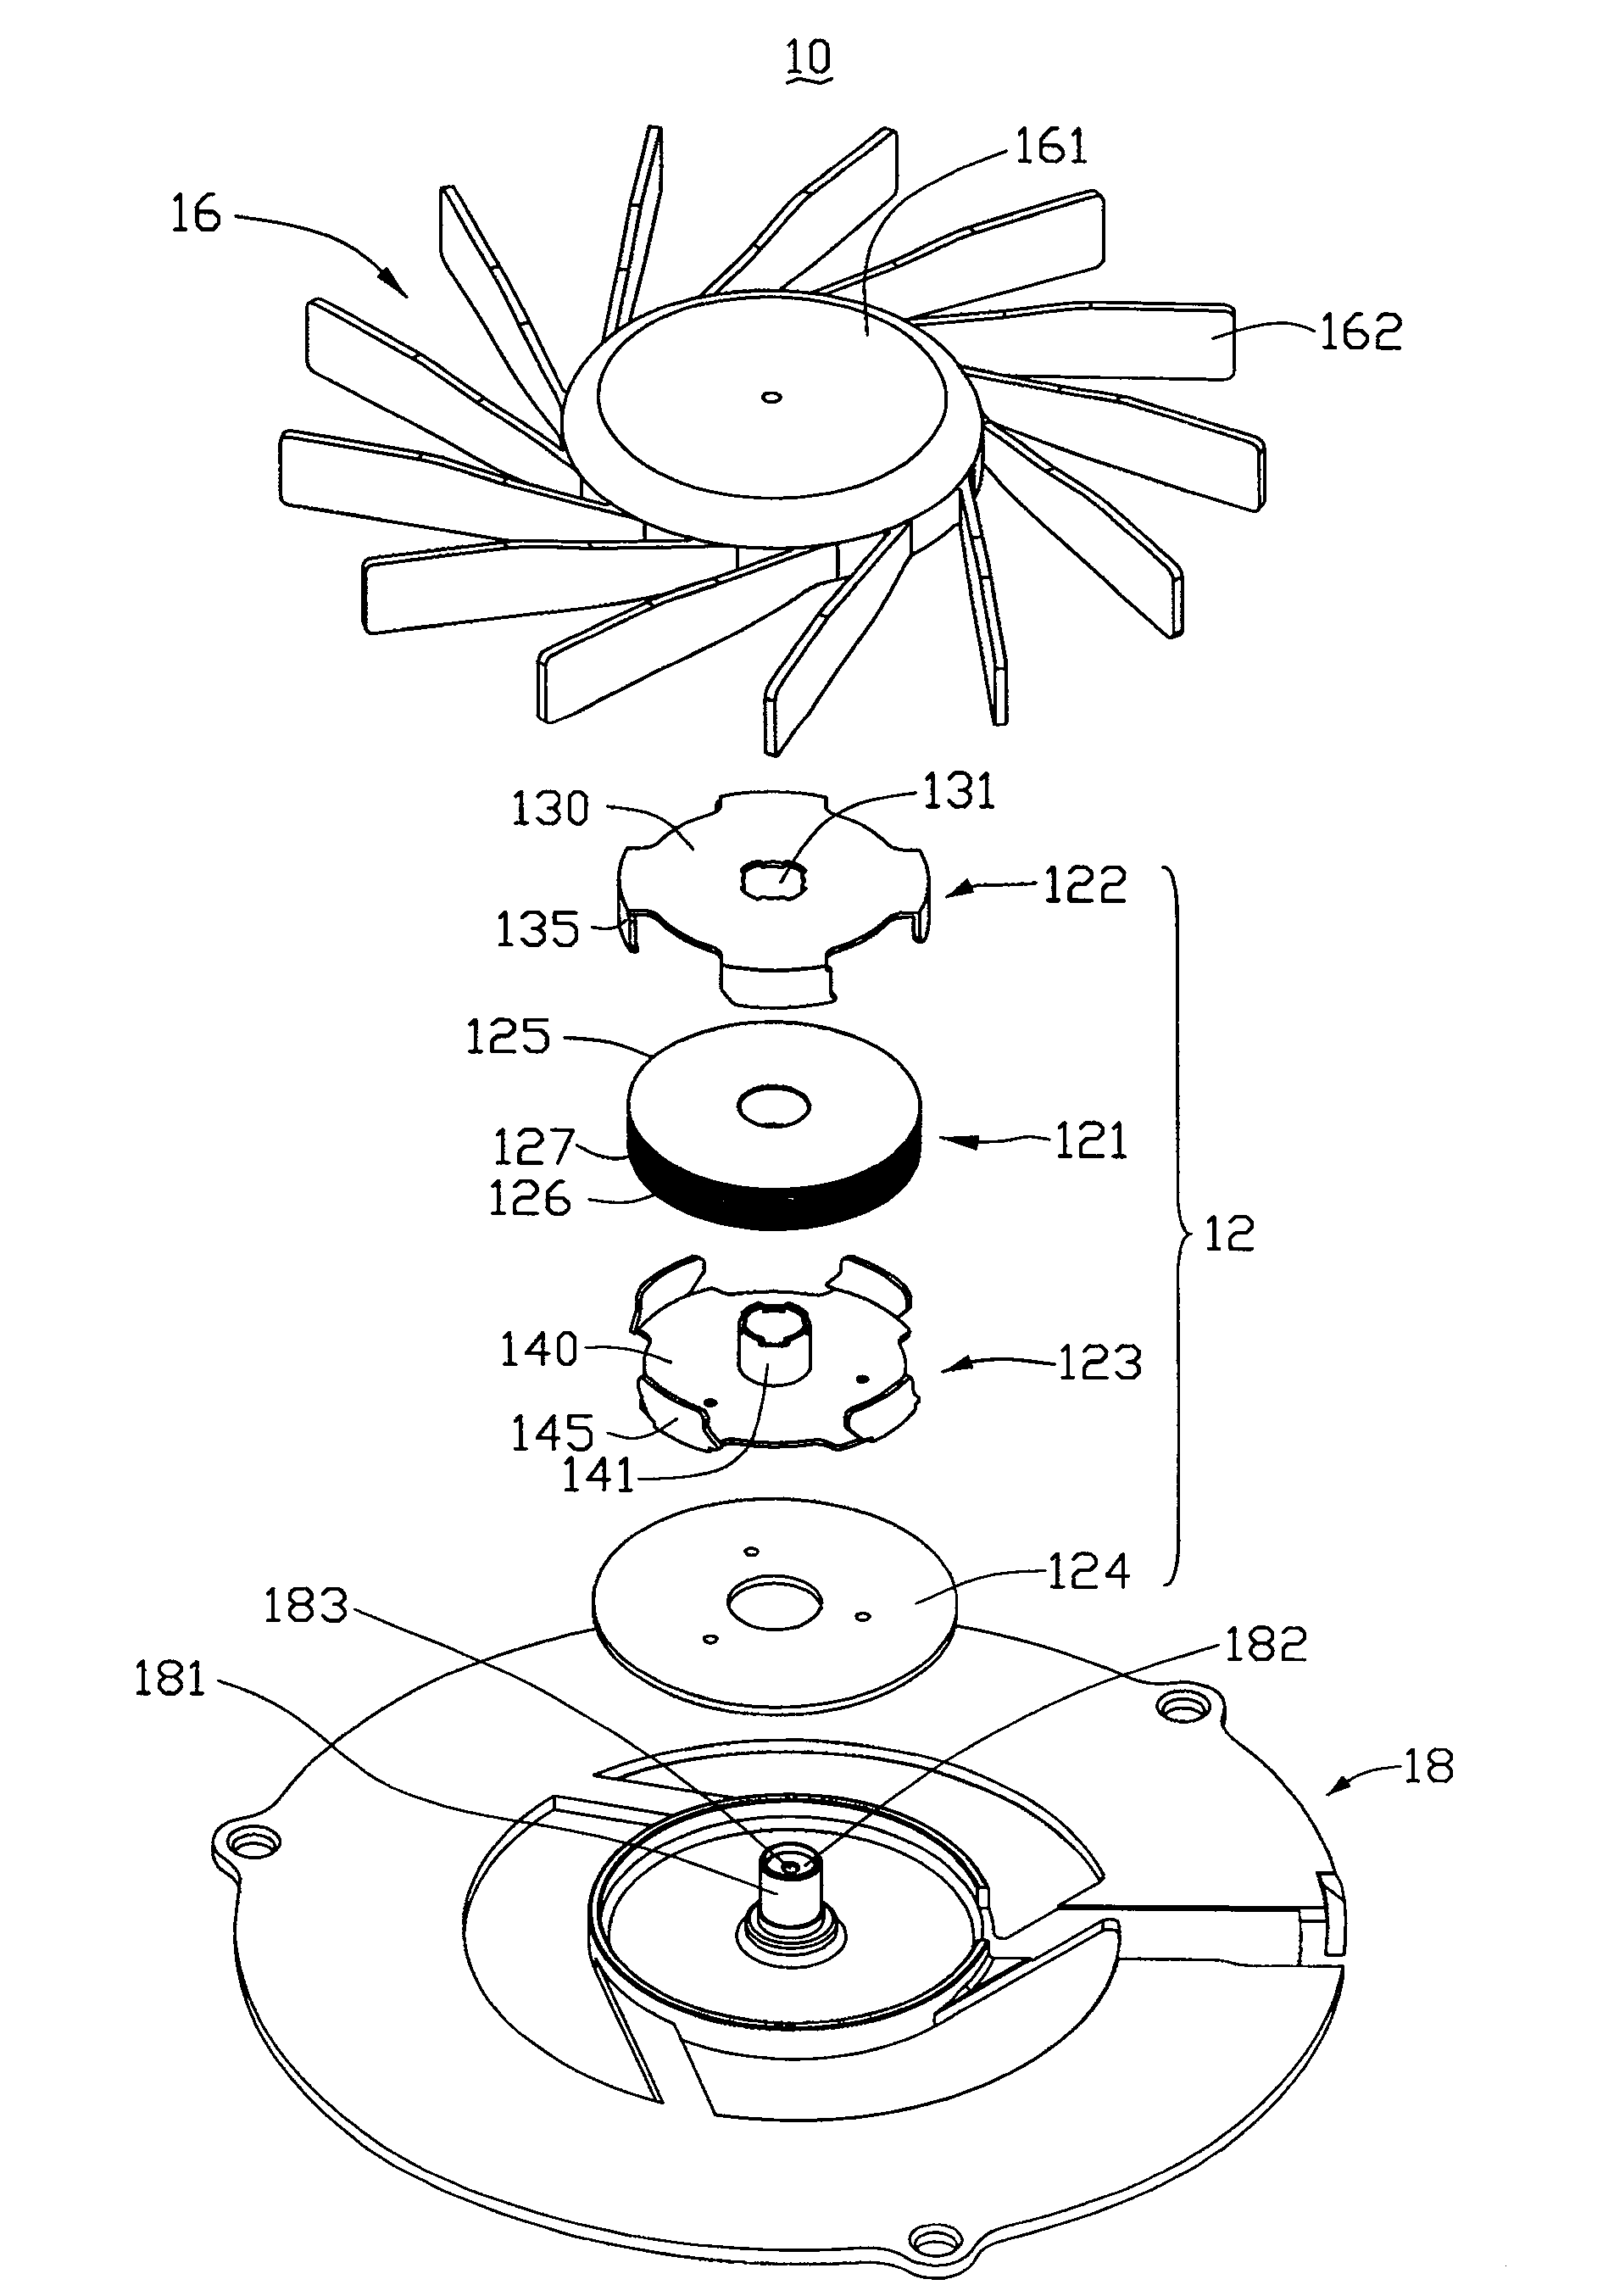 Motor and its stator structure